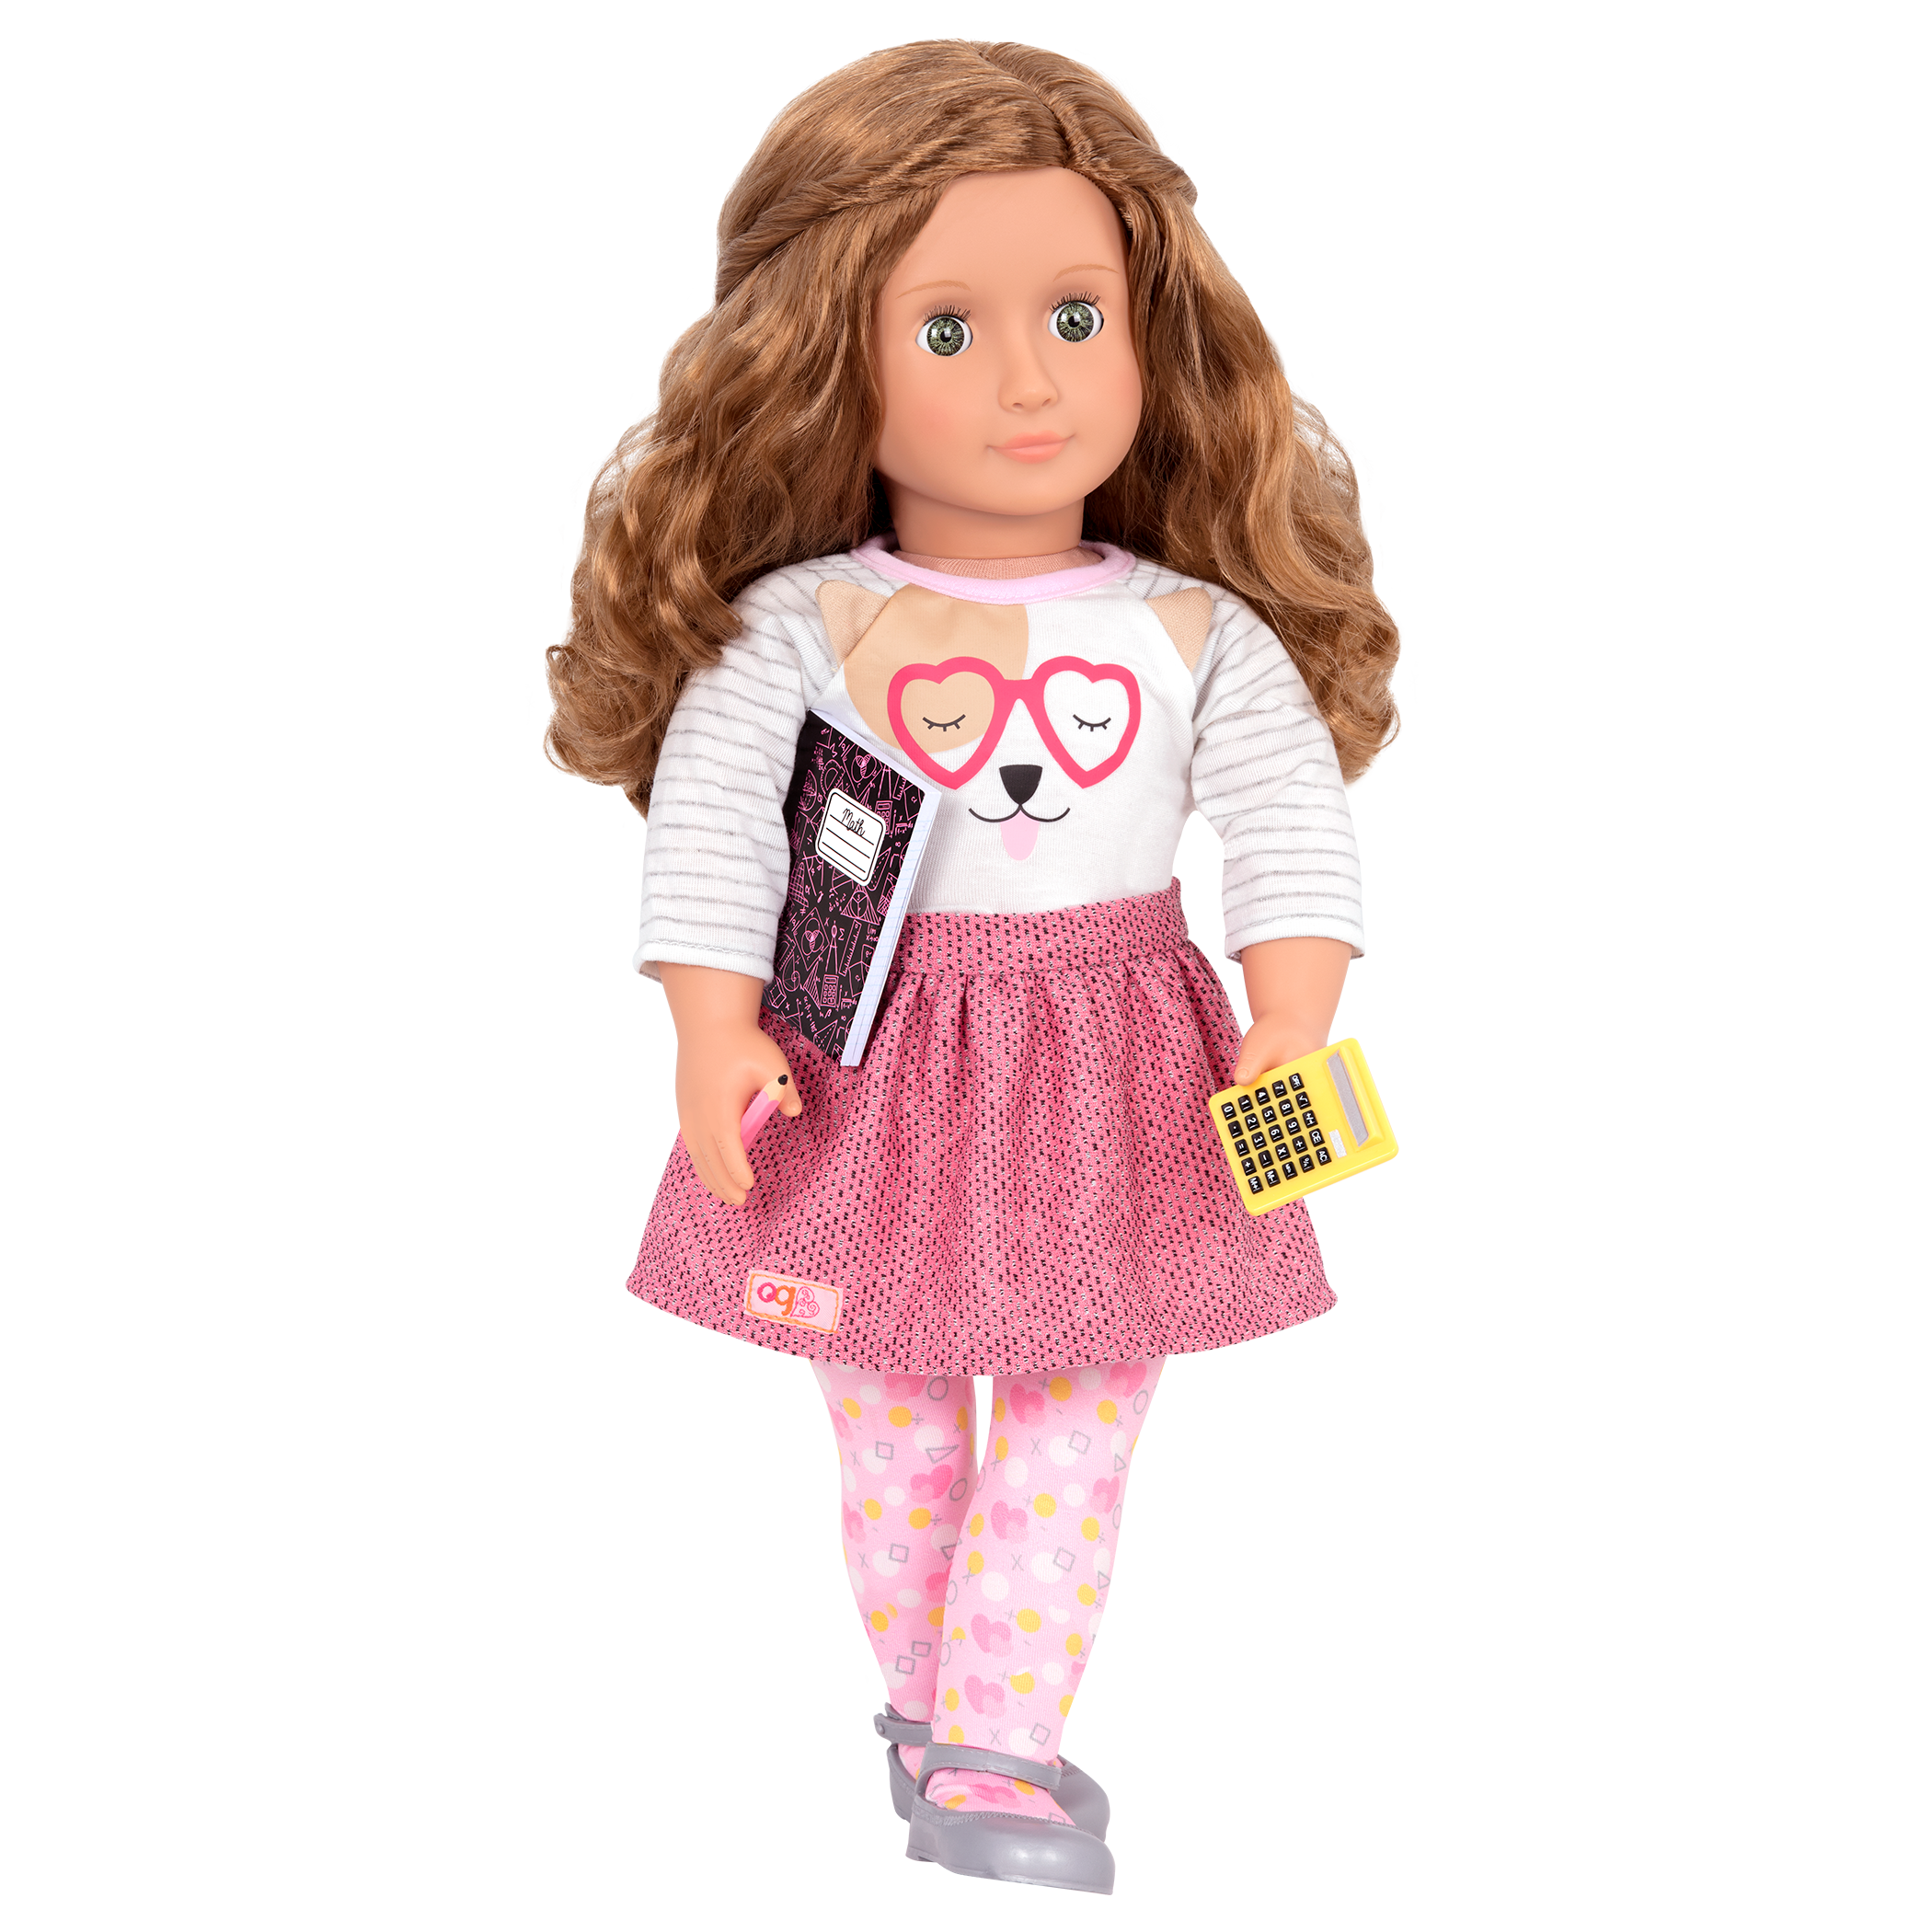 Lucy Grace wearing Classroom Cutie outfit with school supplies